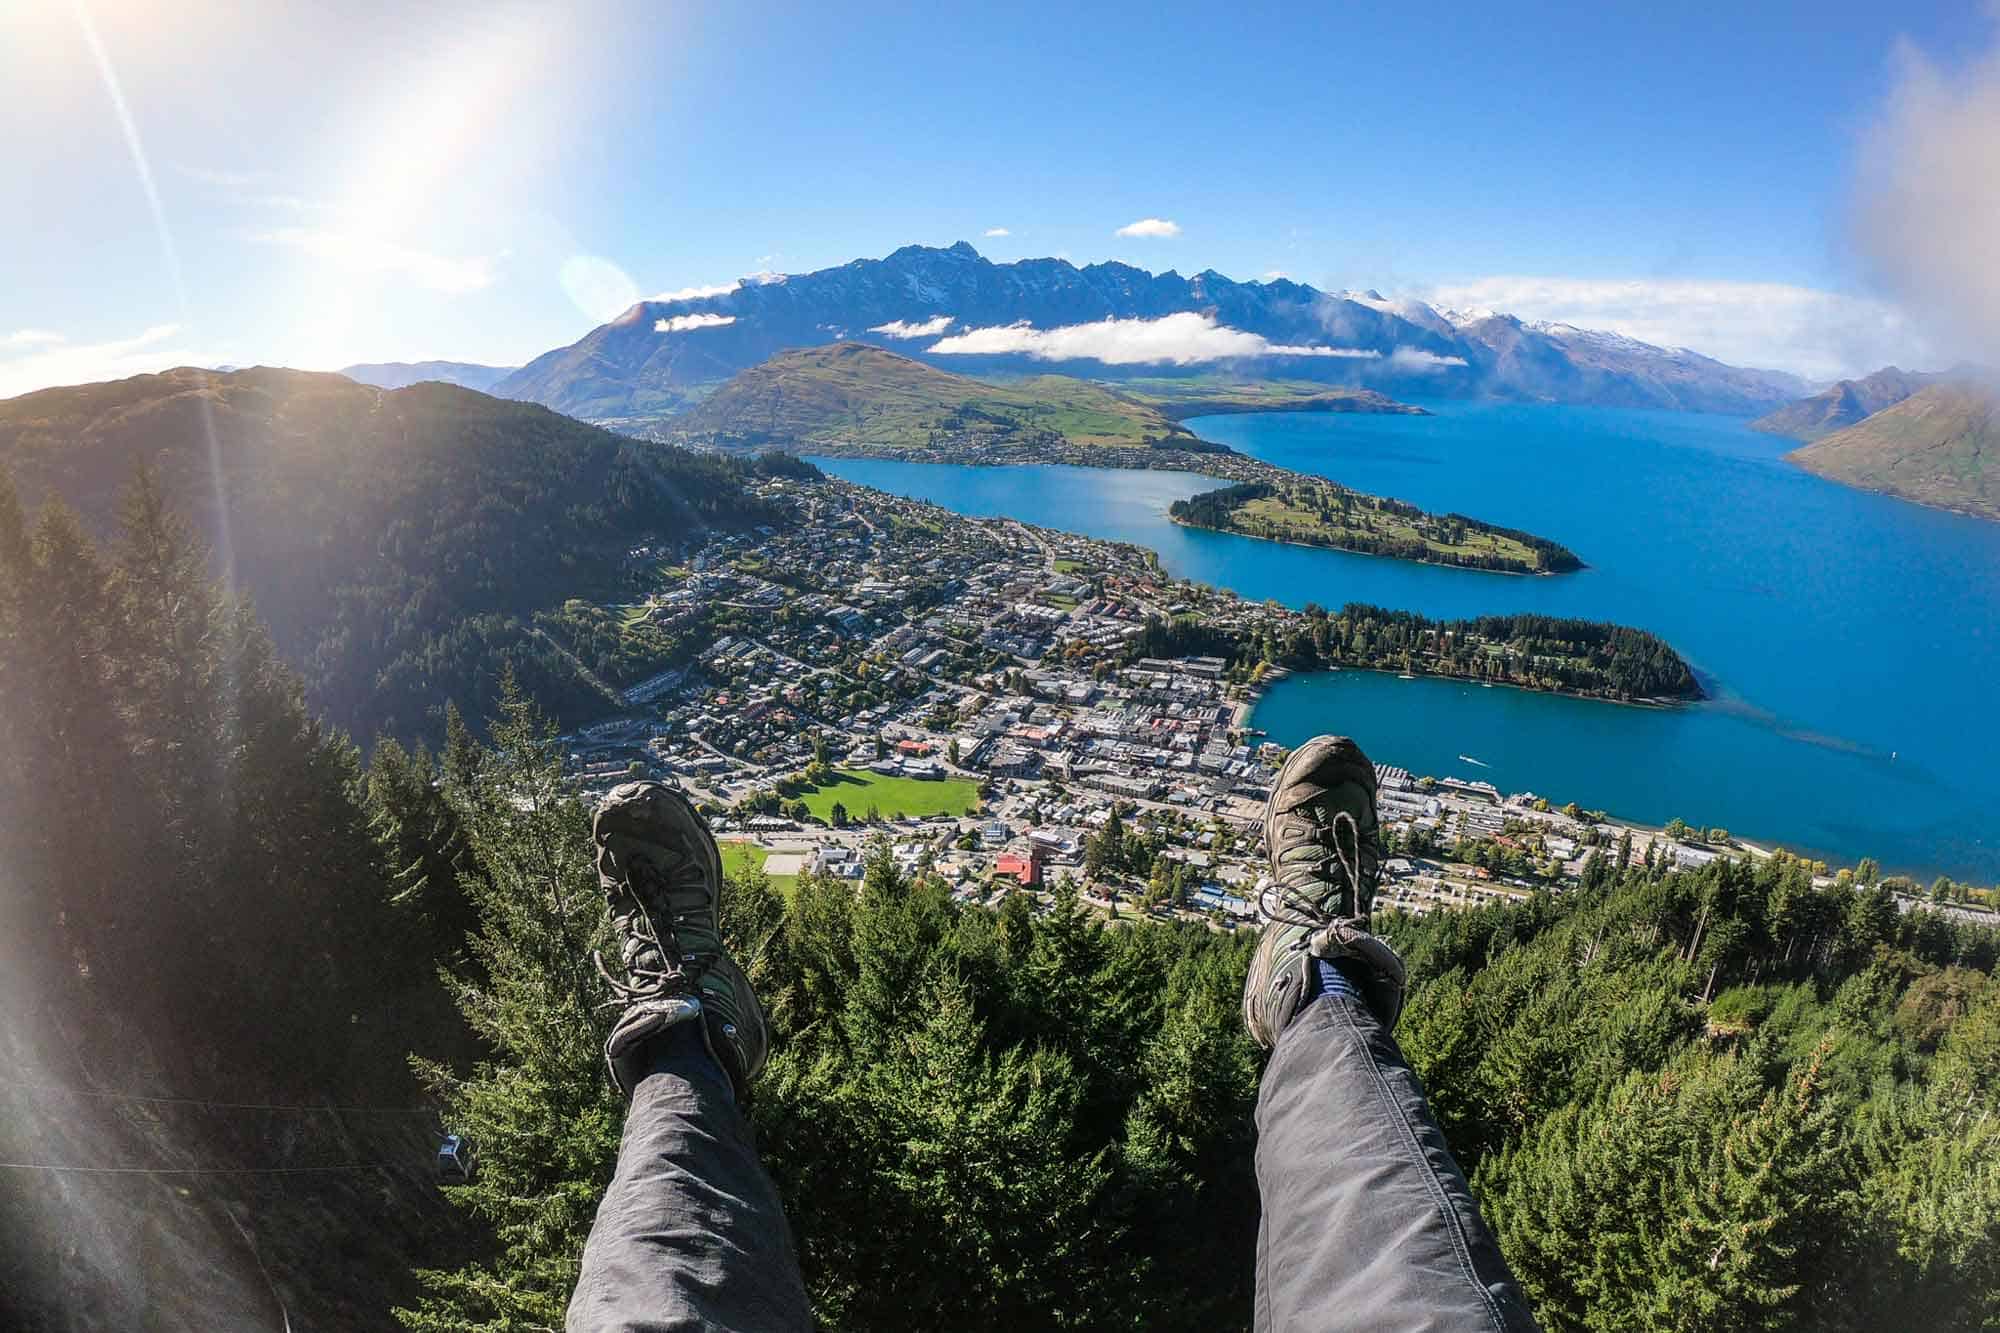 21 EPIC Things to Do in Queenstown, NZ [2022 Guide]